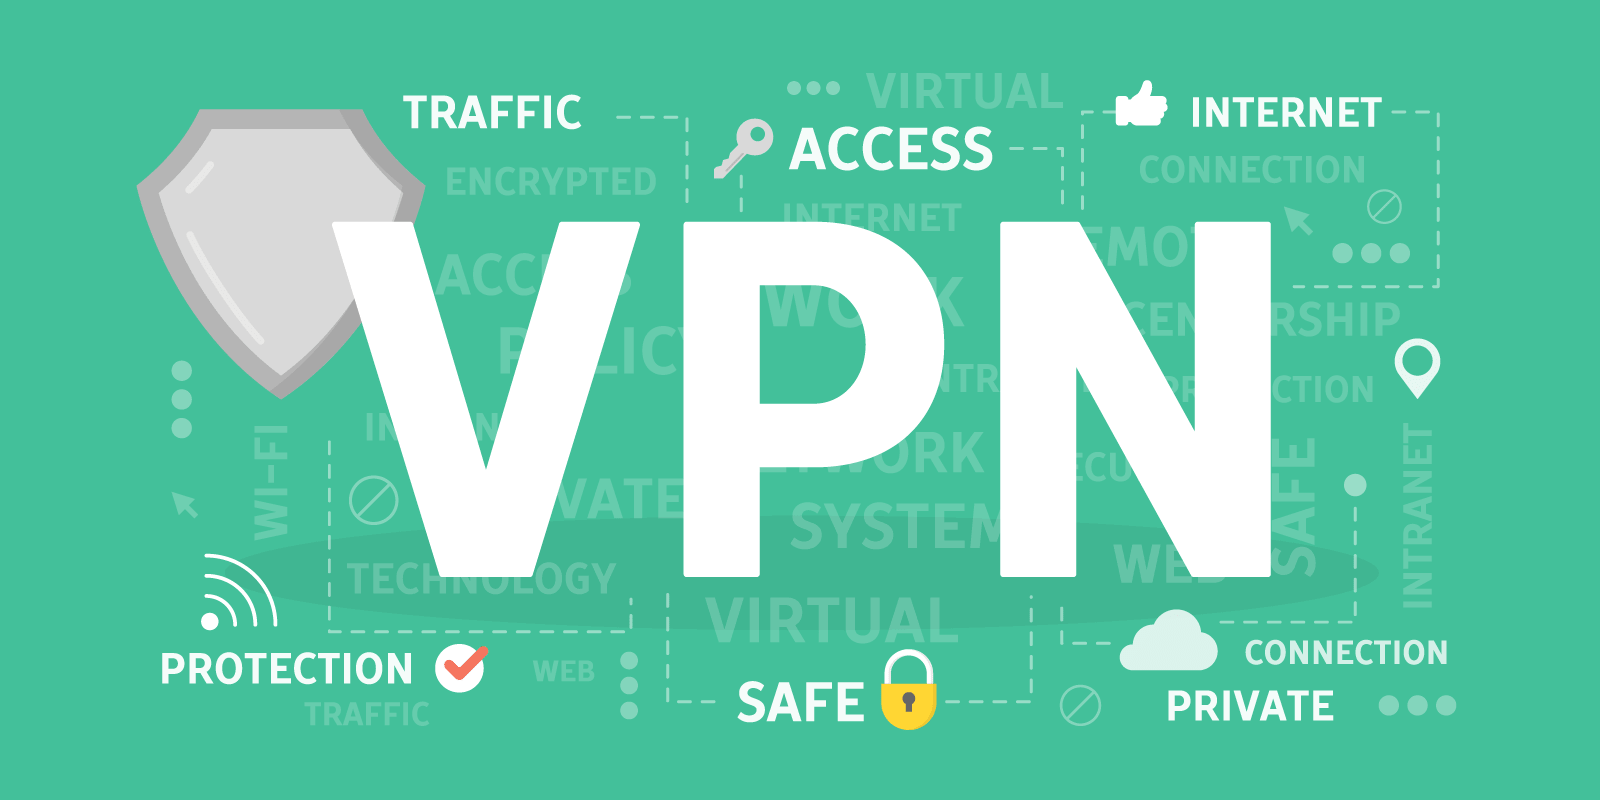 Top Signs of a Good VPN and Top Signs of a Bad VPN - 2022 Guide